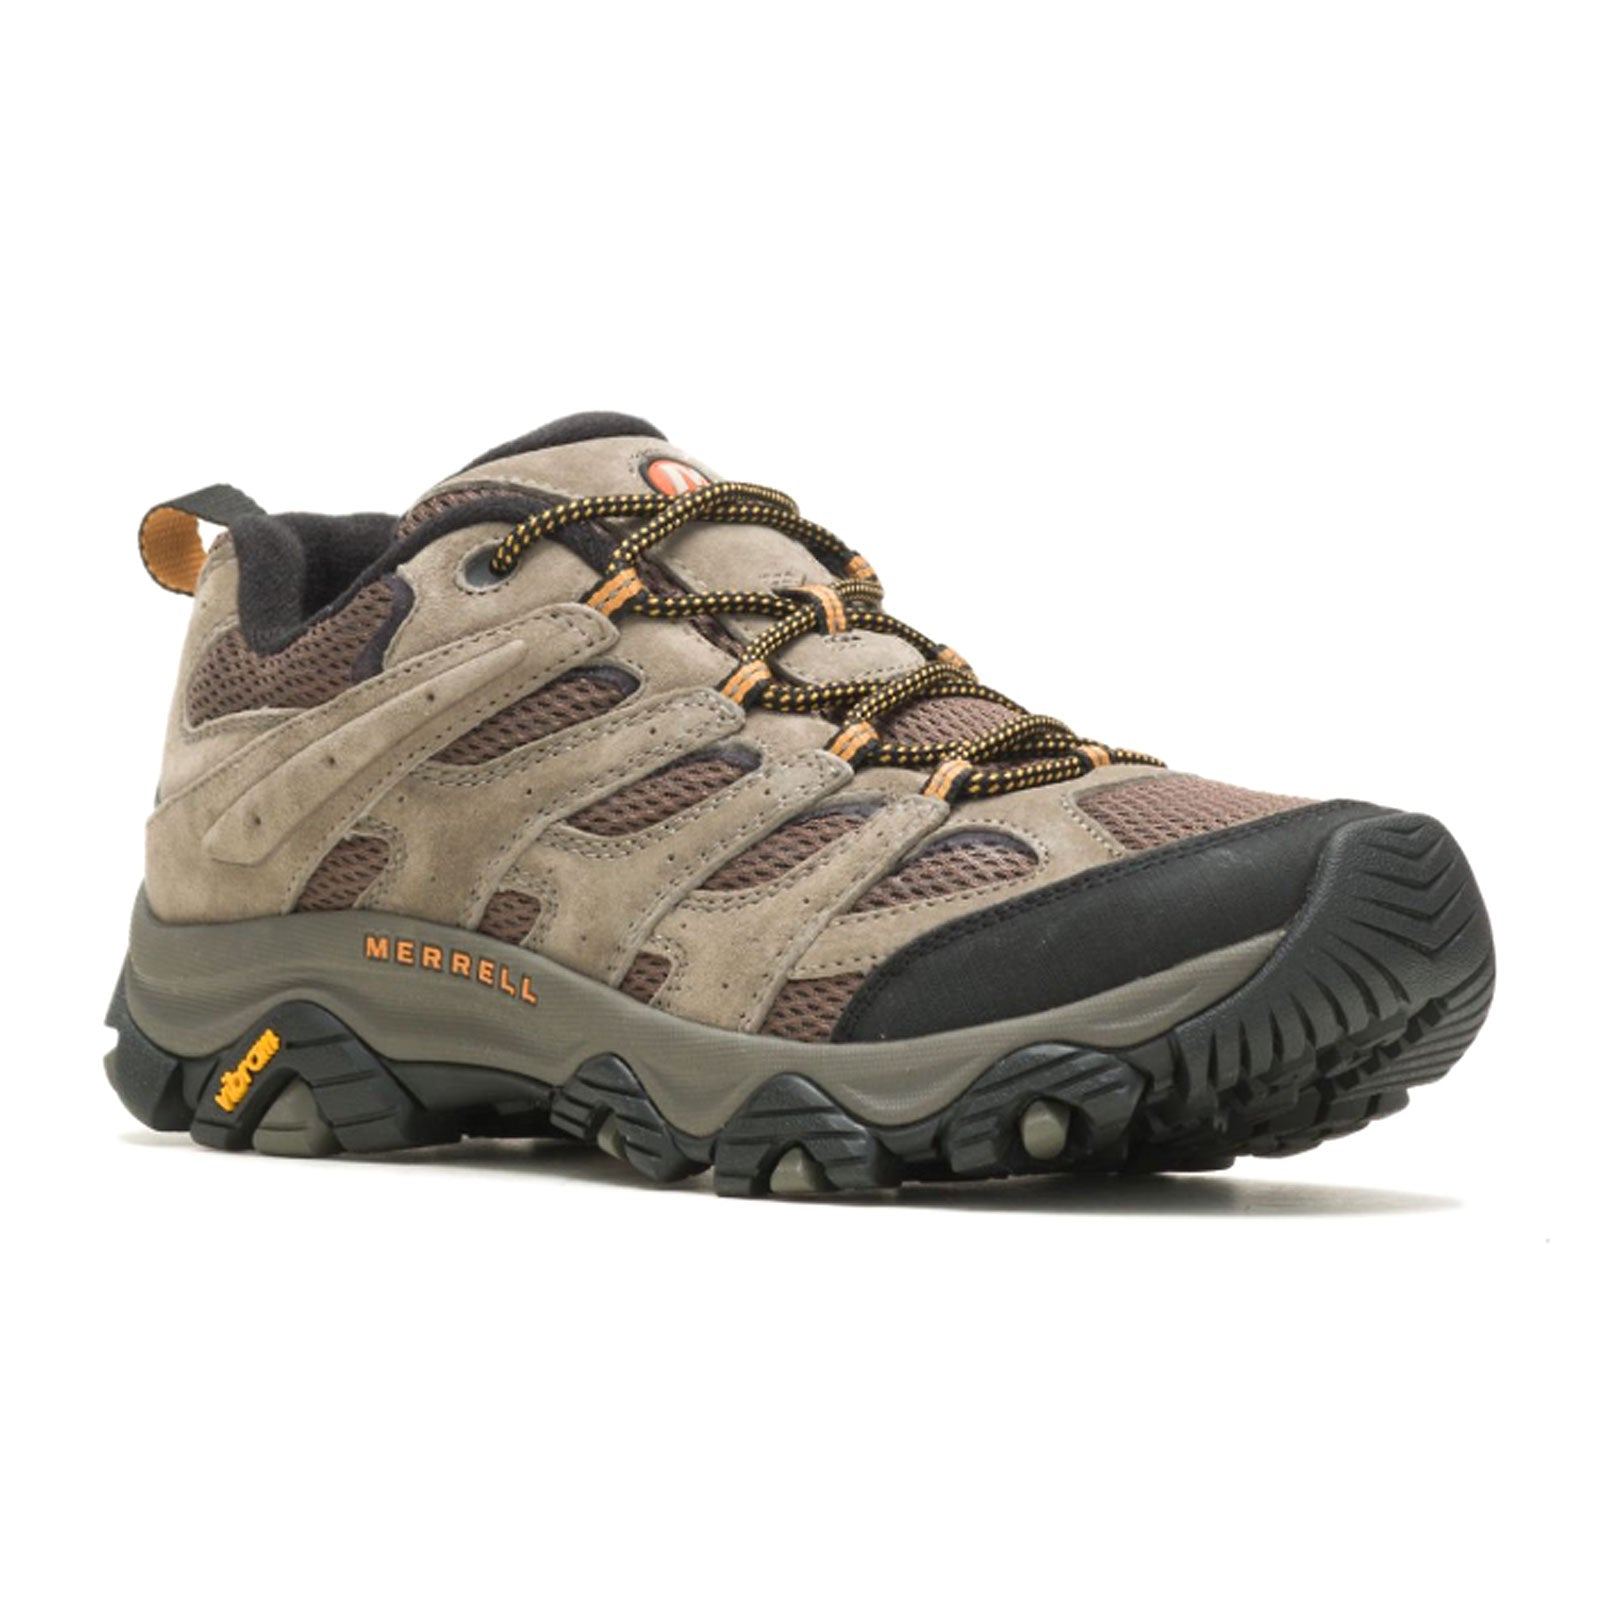 Merrell Moab 3 Low Hiking Boot (Men) - Walnut Athletic - Hiking - Low - The Heel Shoe Fitters